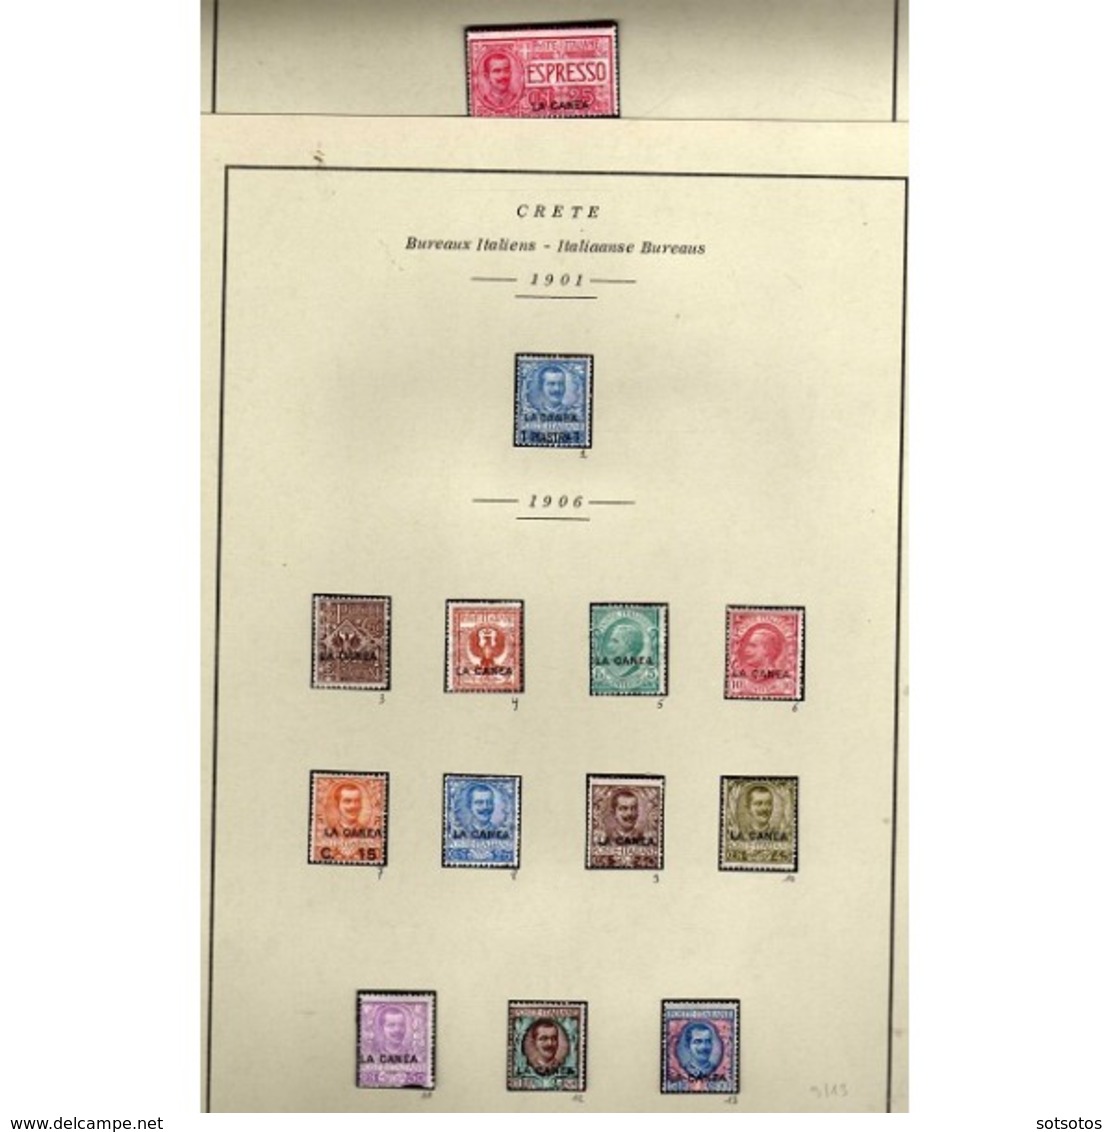 CRETE: Nice Collection Of 13 Mint Stamps - Of  Italian Post Office - Catalogue Value: HELLAS - 518€, ΕΡΜΗΣ - 384,50€ - Crète